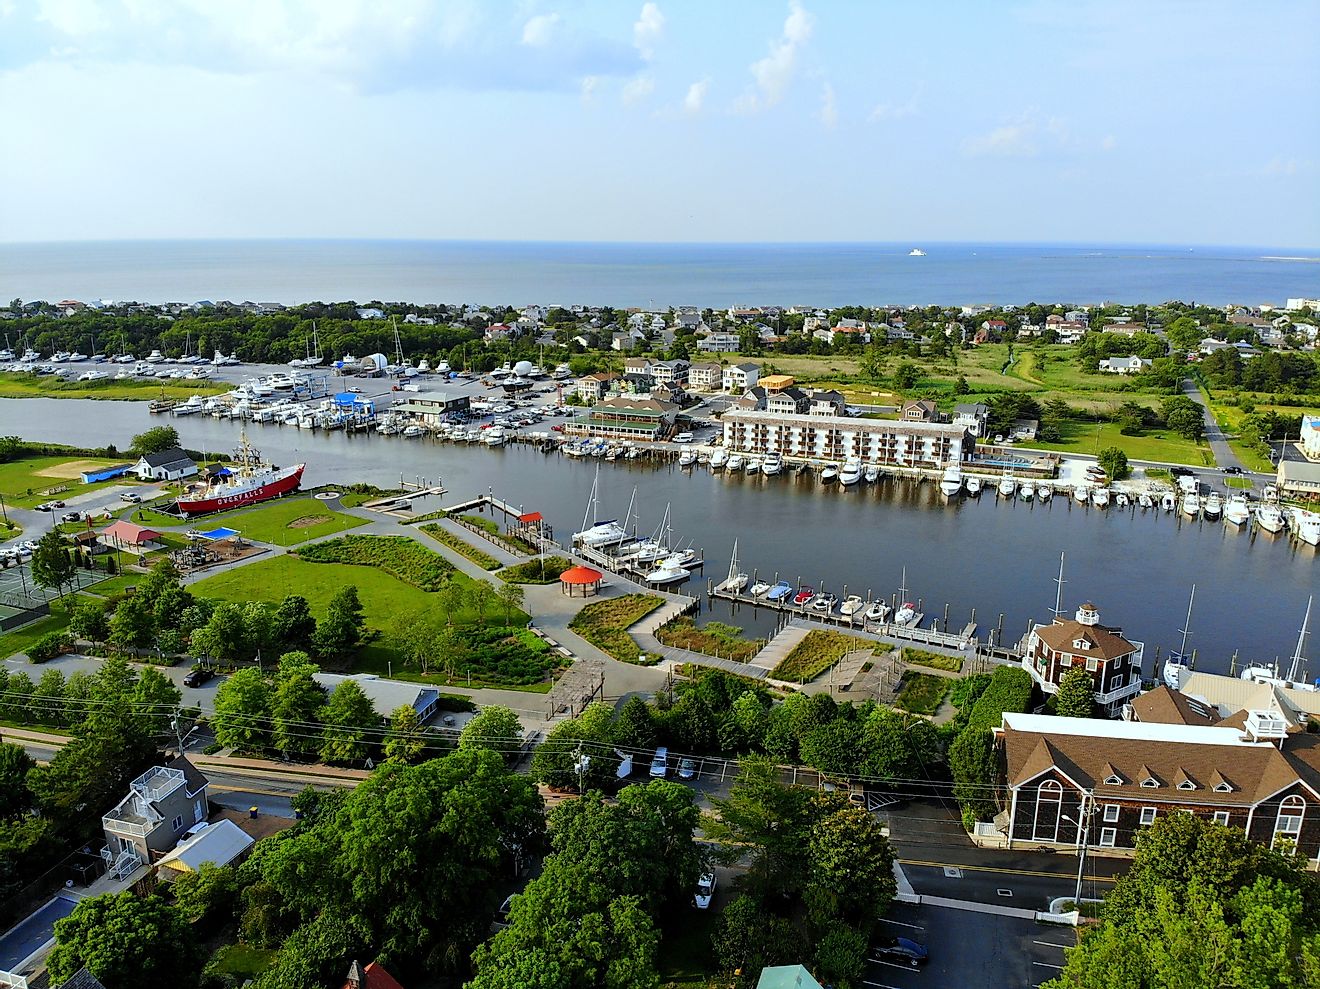  The aerial view of the beach town of Lewes, Delaware.